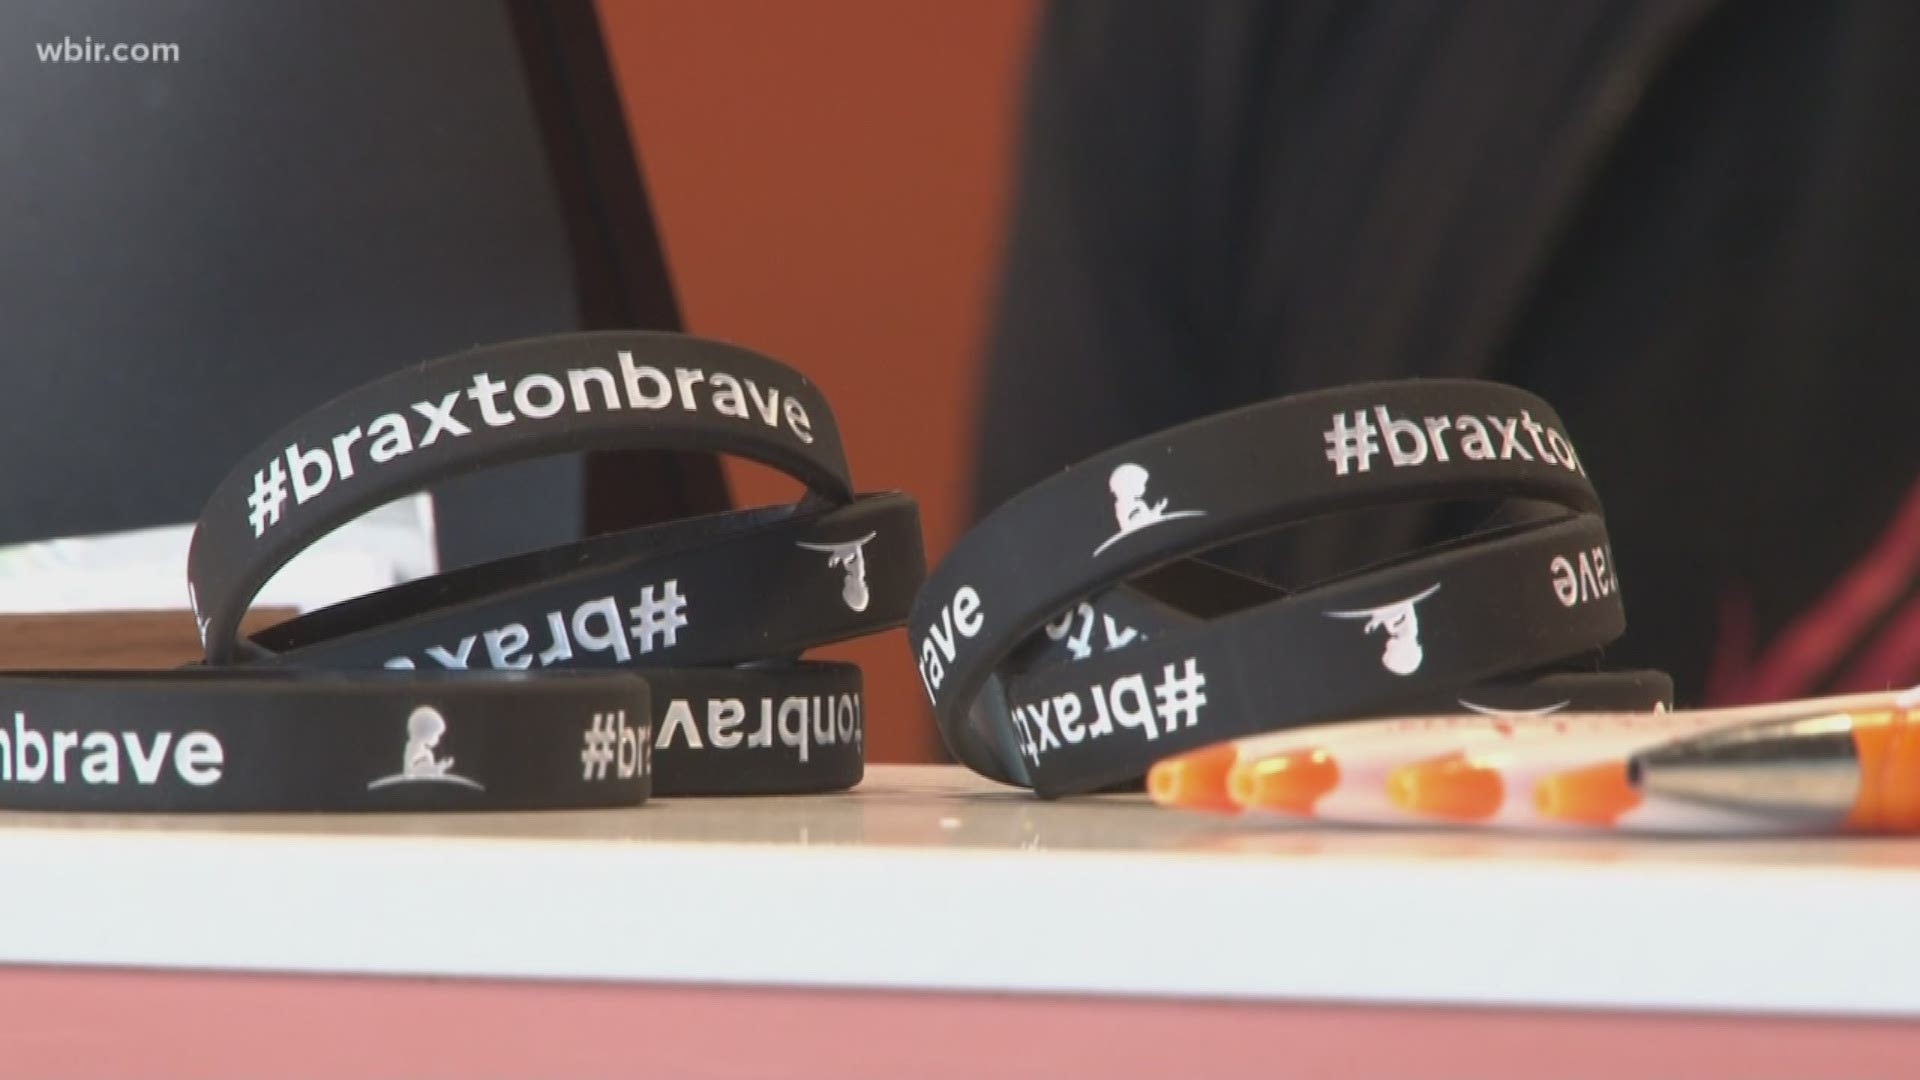 The gym hosted the Braxton Brave fundraiser Sunday to raise money for the children at St. Jude. Braxton is a young boy who is currently receiving treatment for brain and spinal cancer.